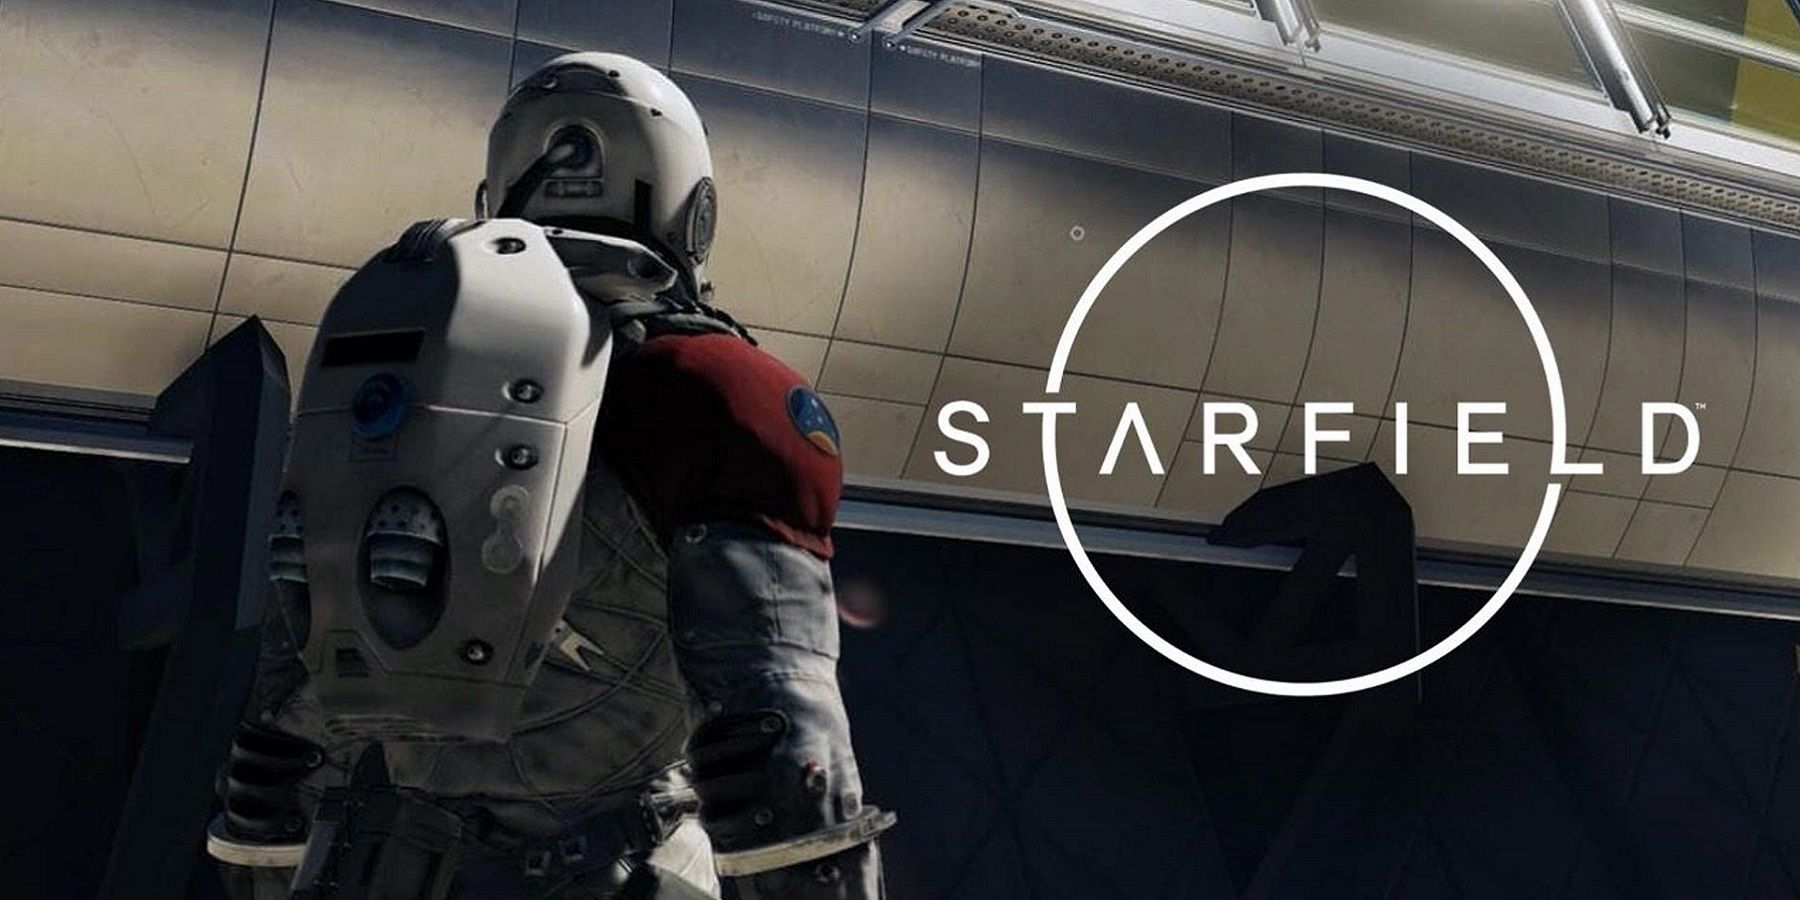 Image from Starfield showing an astronaut with their back to the camera.